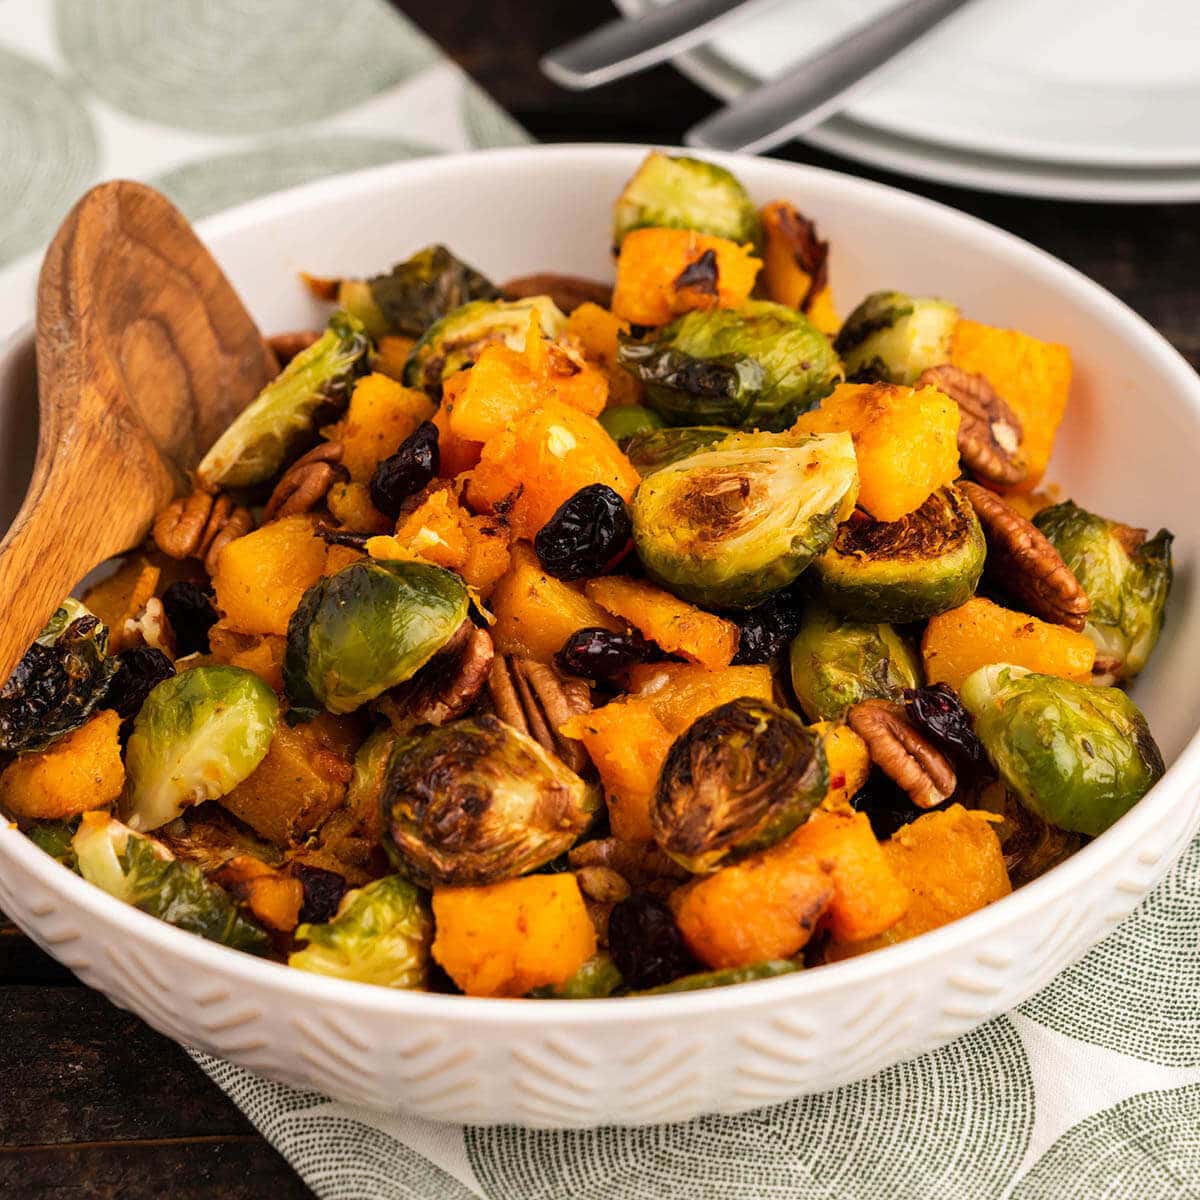 Roasted Butternut Squash and Brussels sprouts in serving bowl.